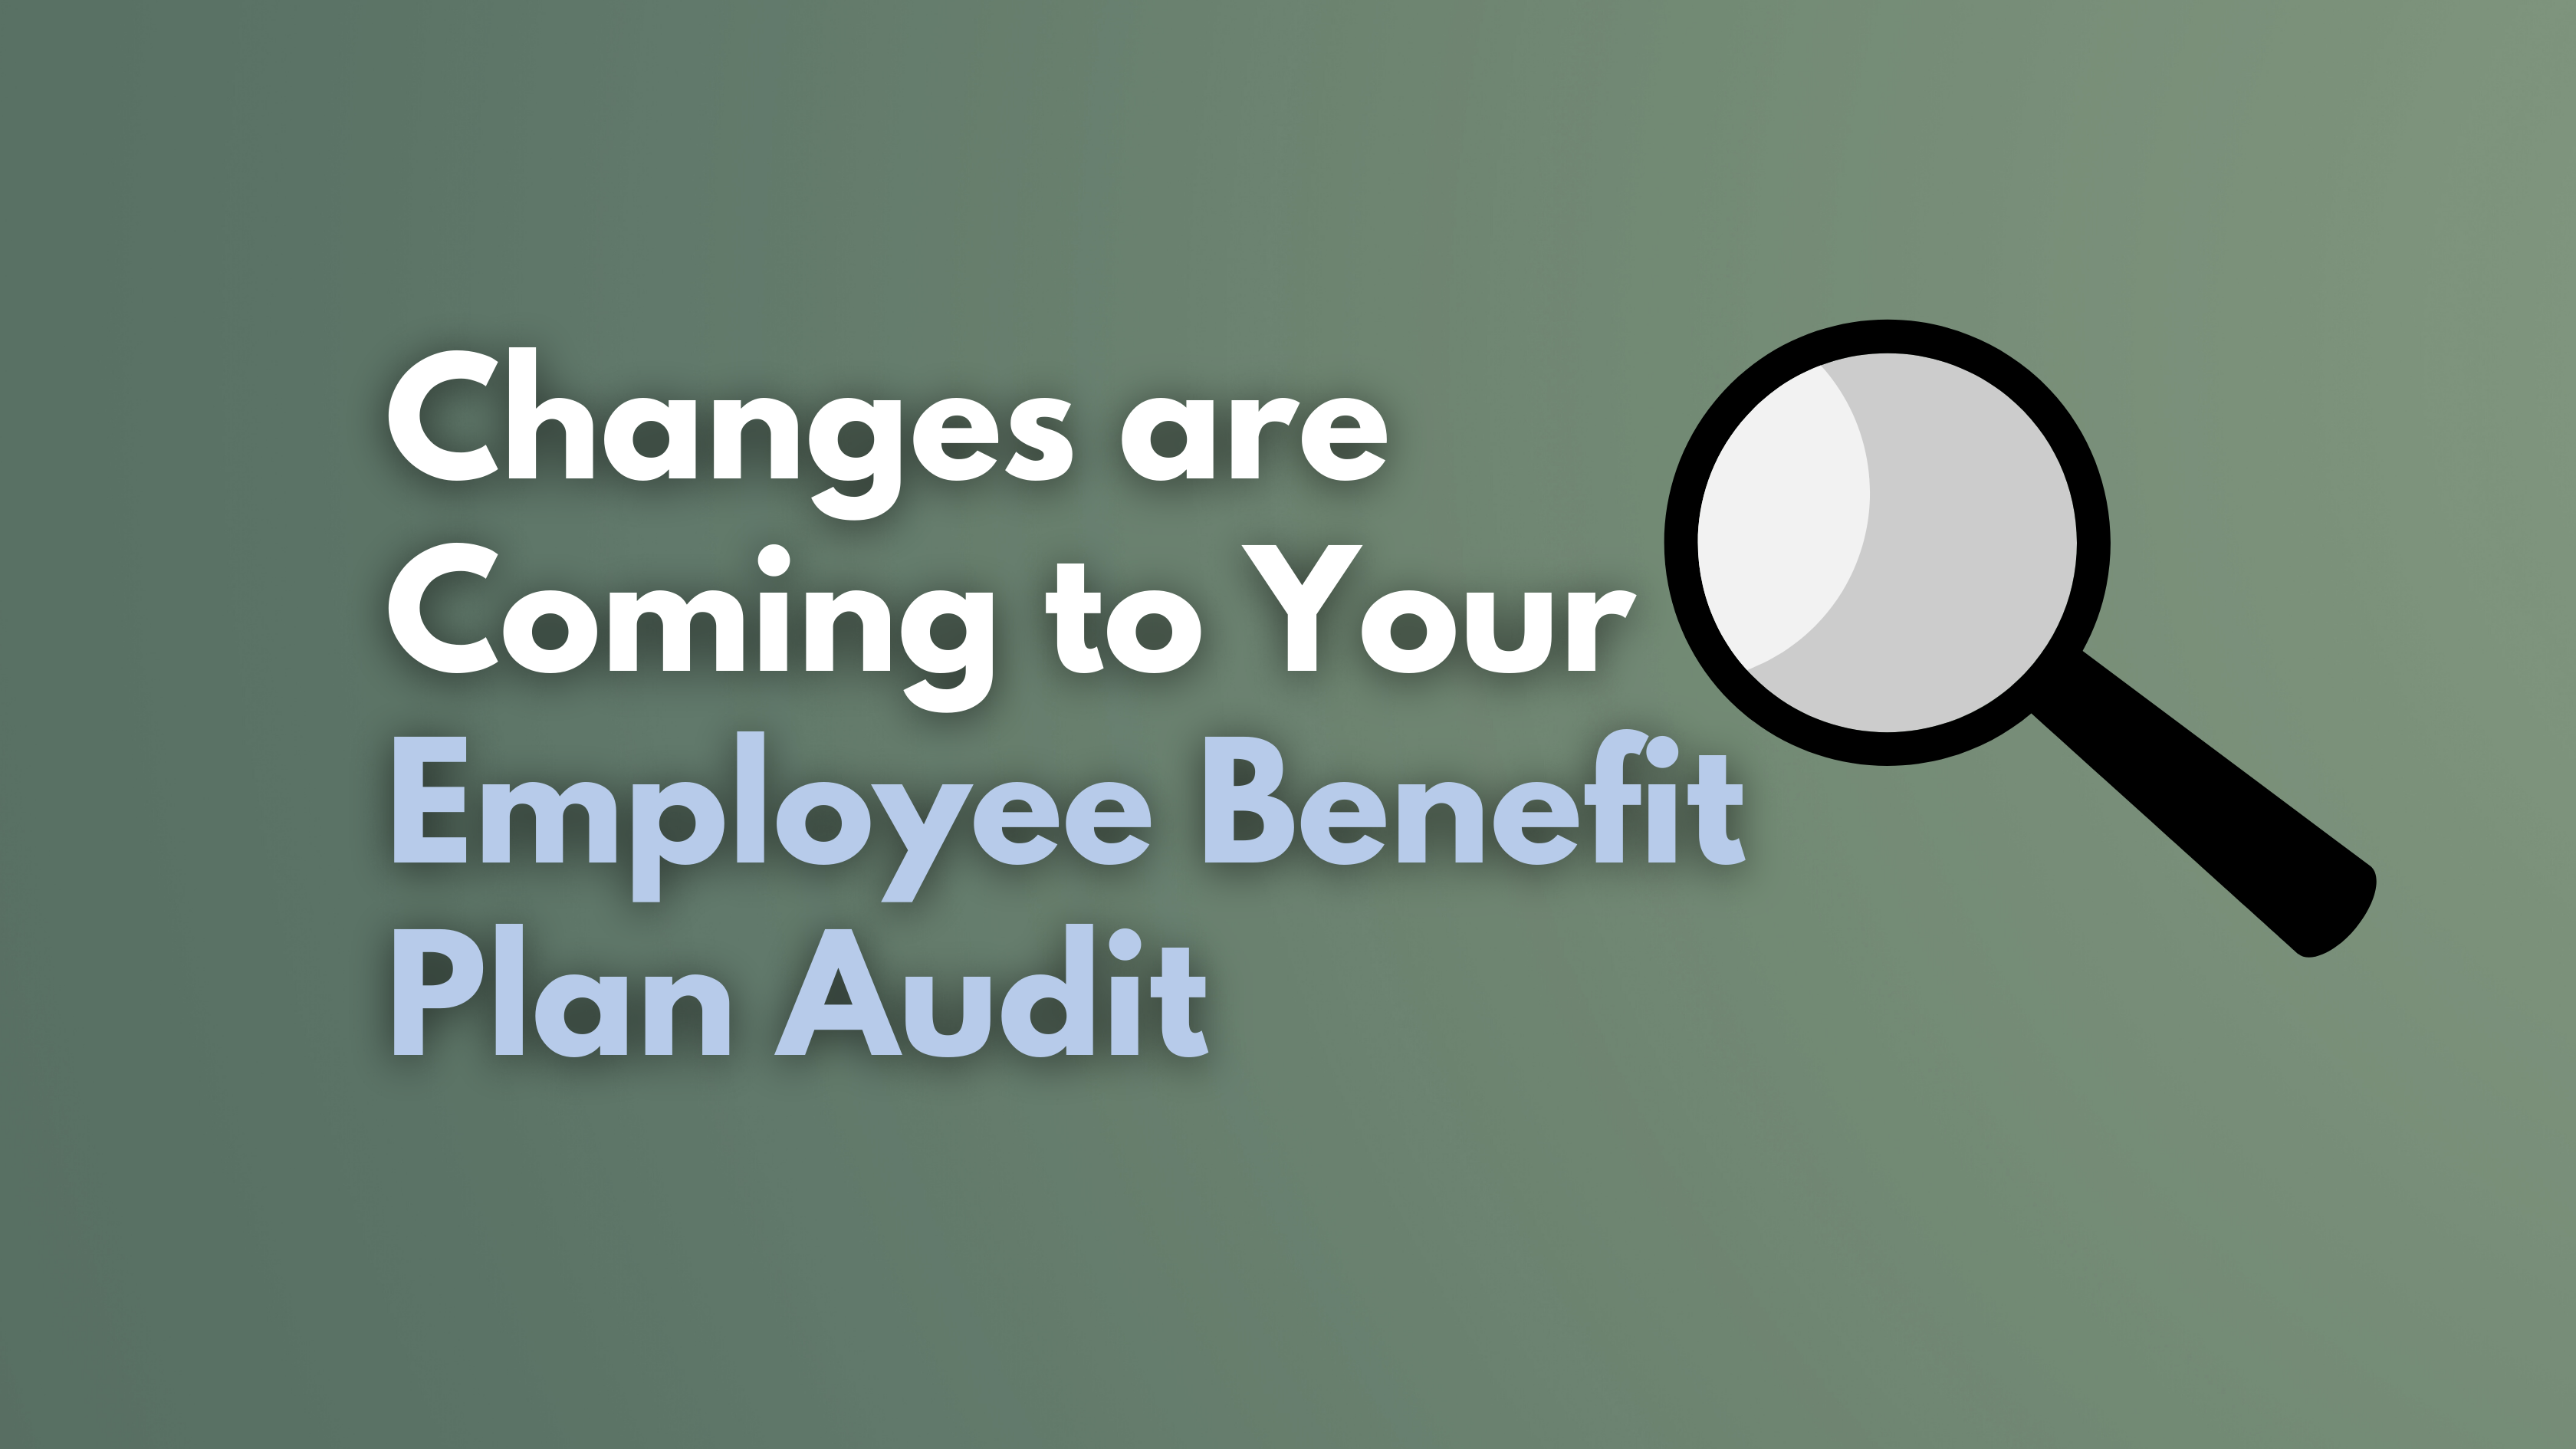 Changes are Coming to Your Employee Benefit Plan Audit: Here’s What You Need to Know